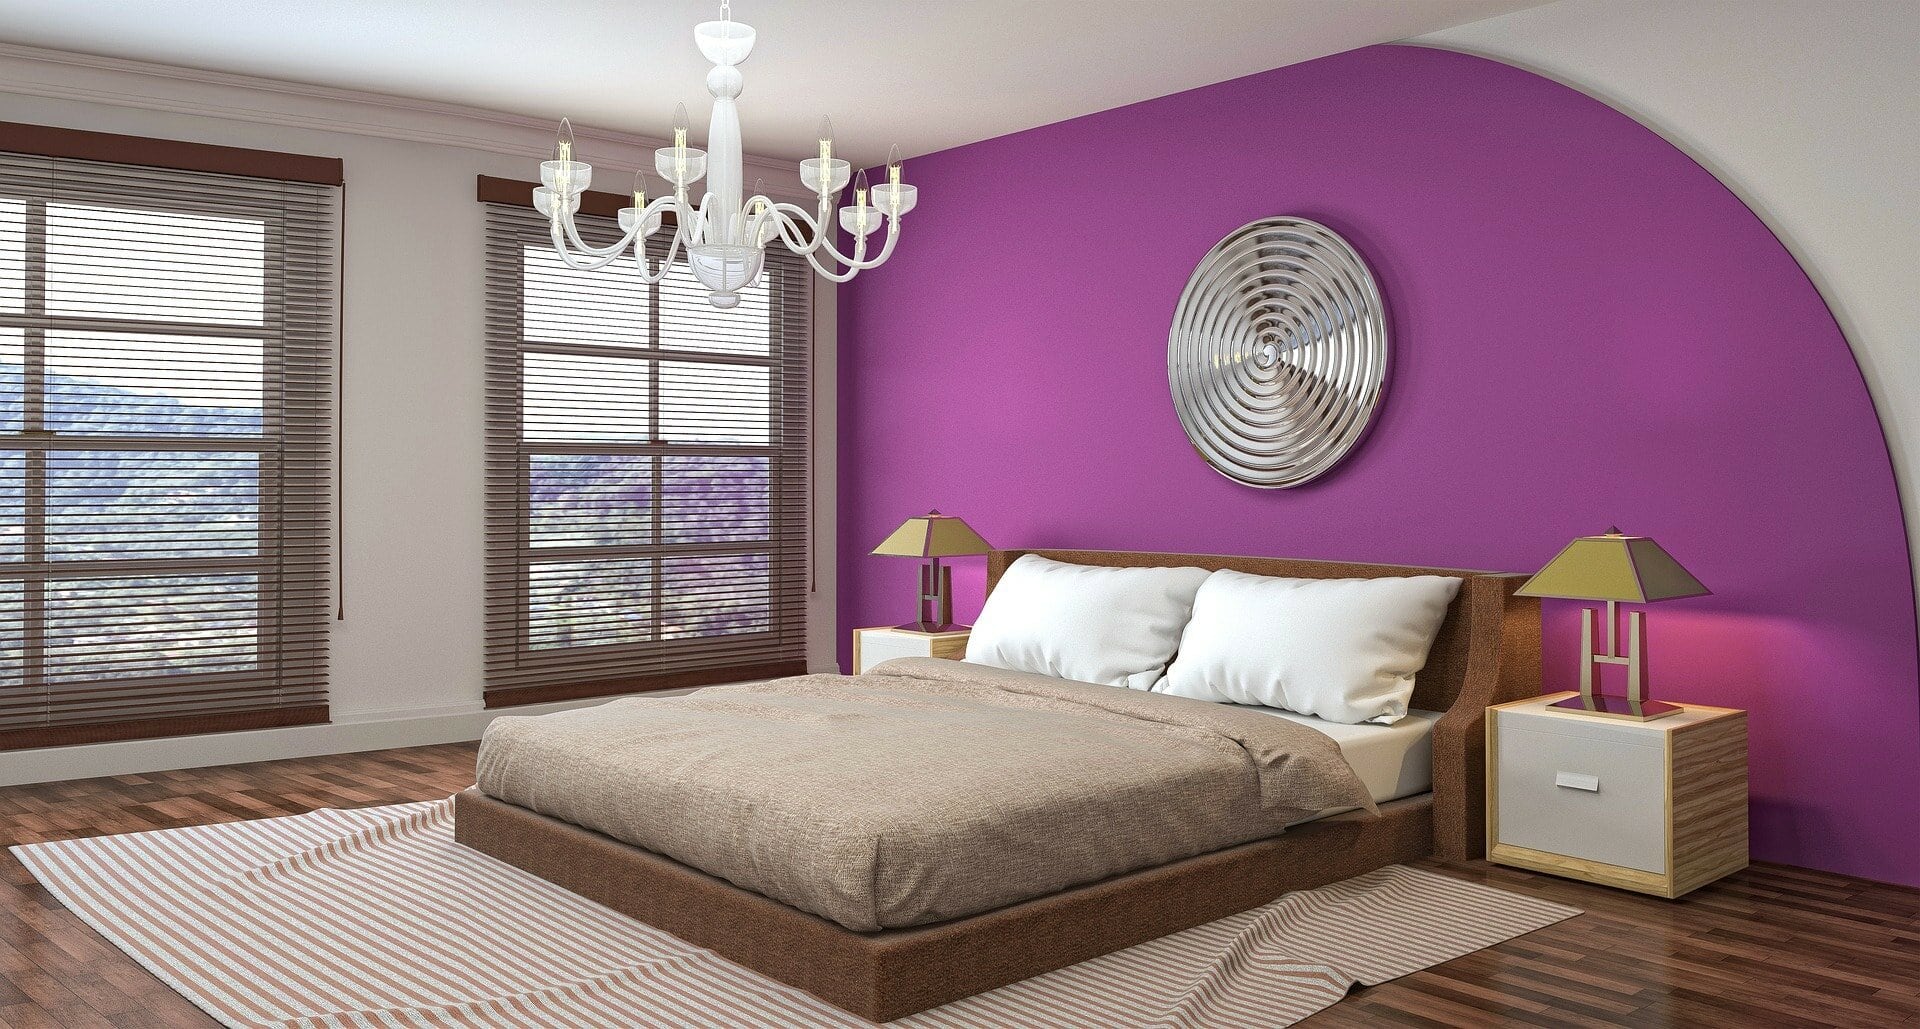 Add Some Drama With a Purple Accent Wall